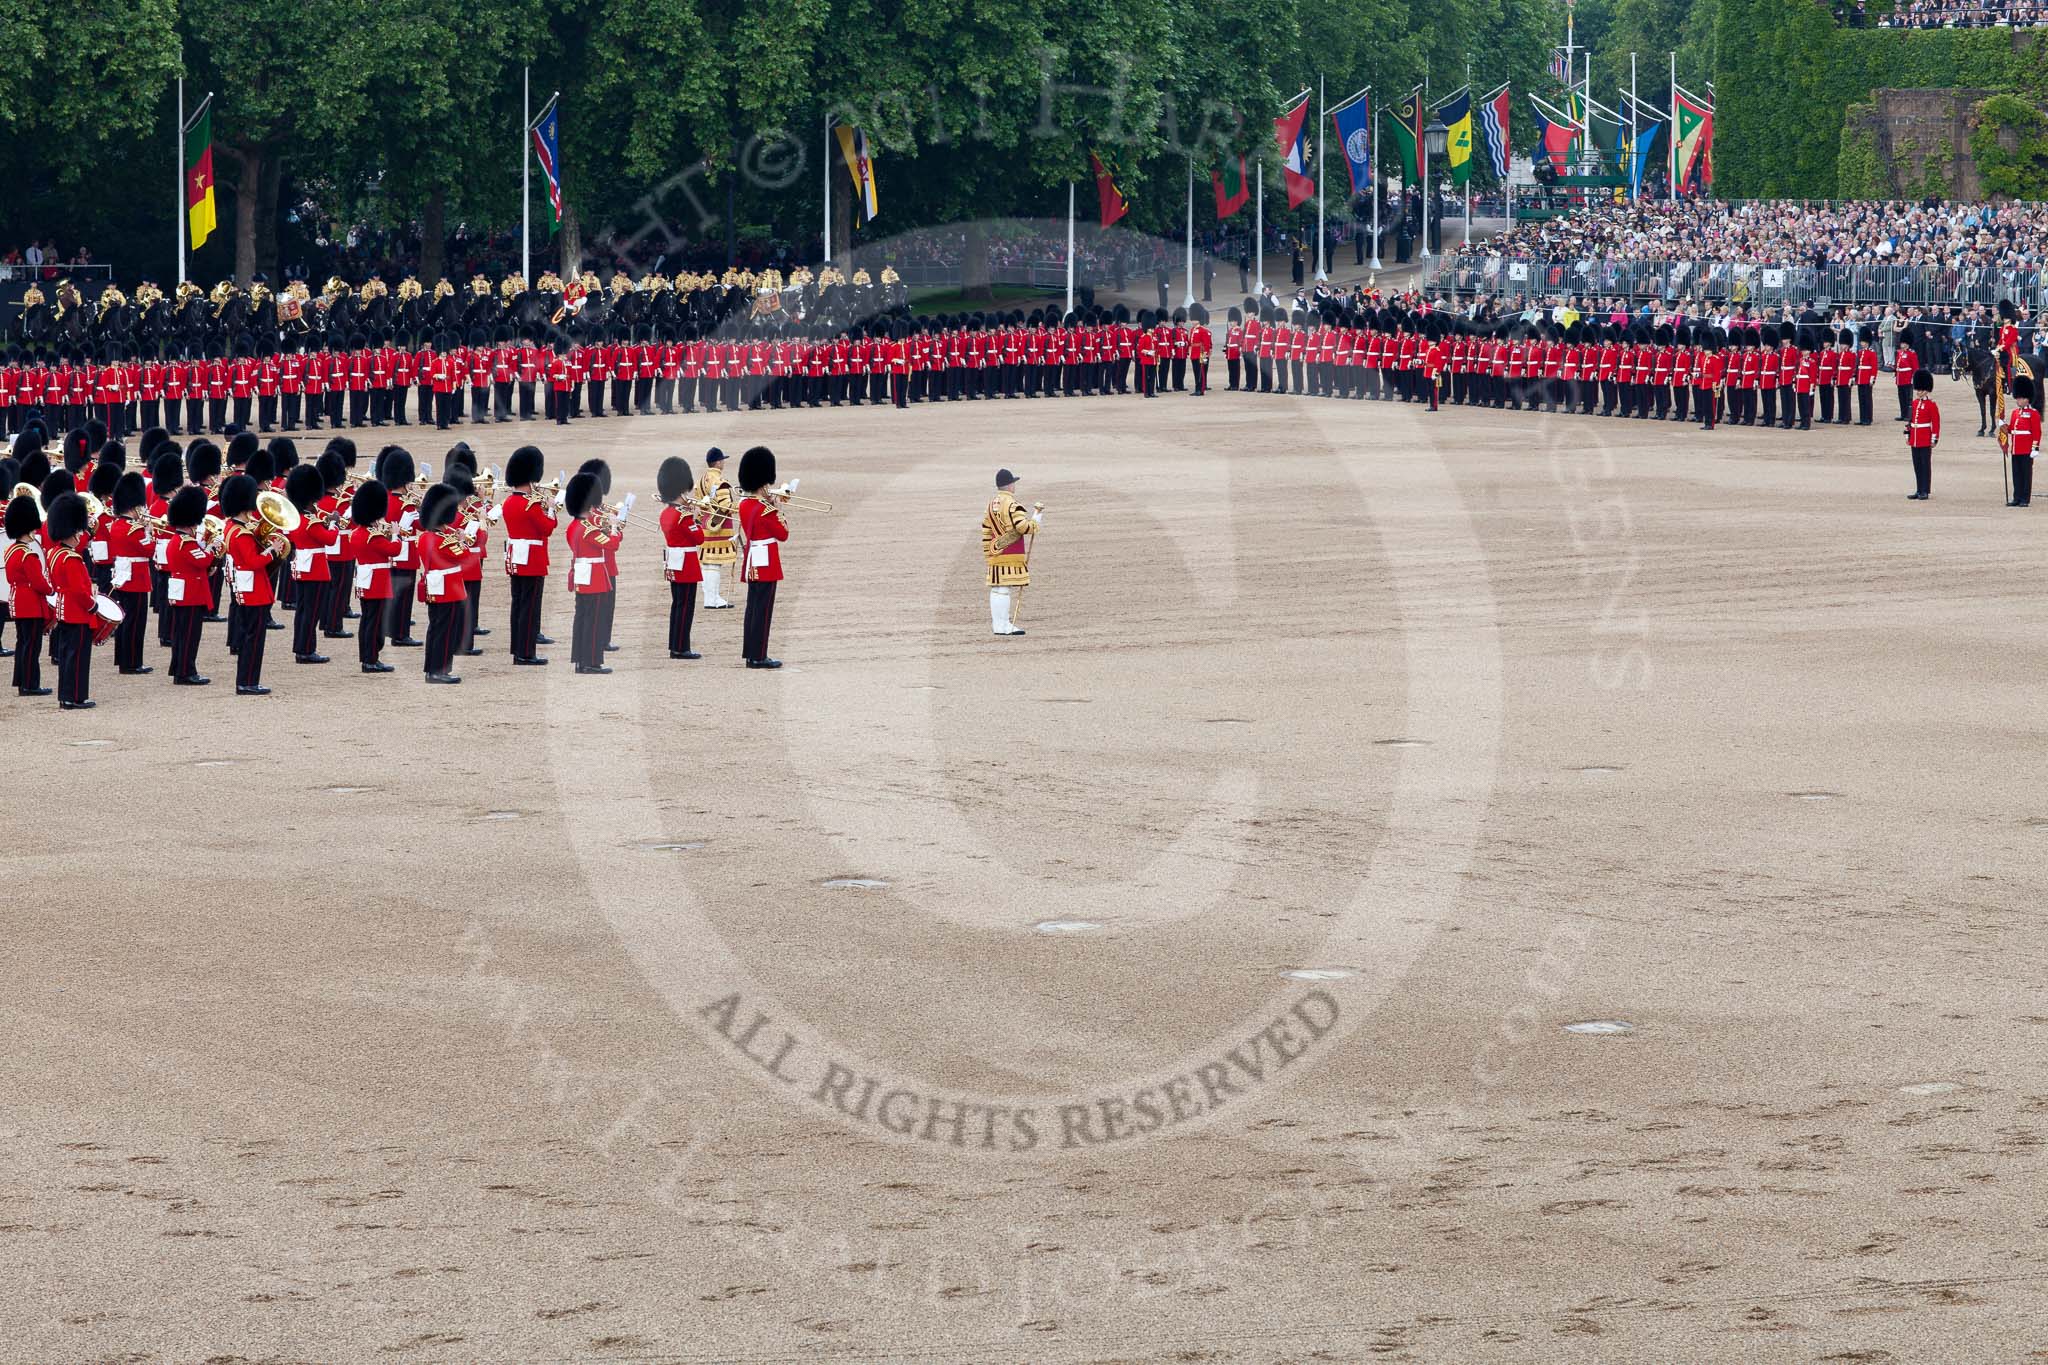 Trooping the Colour 2011: The Massed Bands playing, lead by the drum majors, during the Massed Bands Troop..
Horse Guards Parade, Westminster,
London SW1,
Greater London,
United Kingdom,
on 11 June 2011 at 11:14, image #192